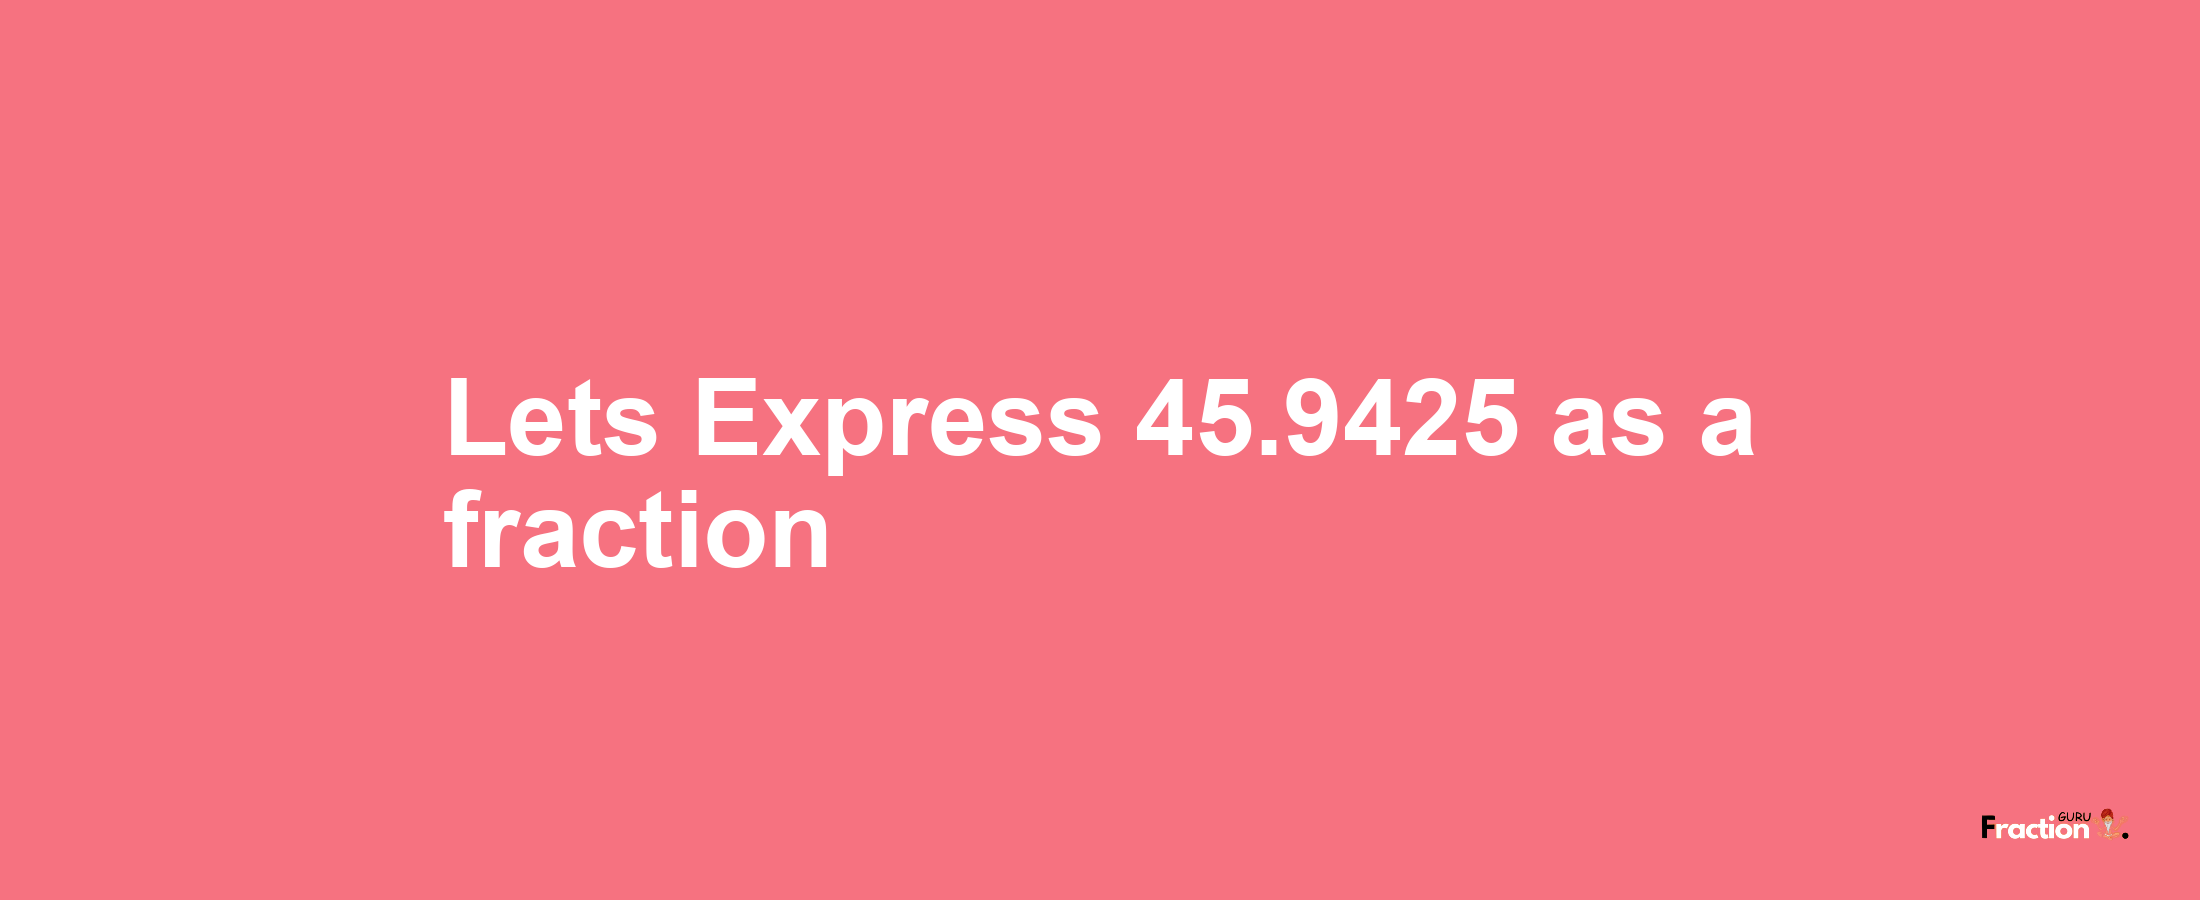 Lets Express 45.9425 as afraction